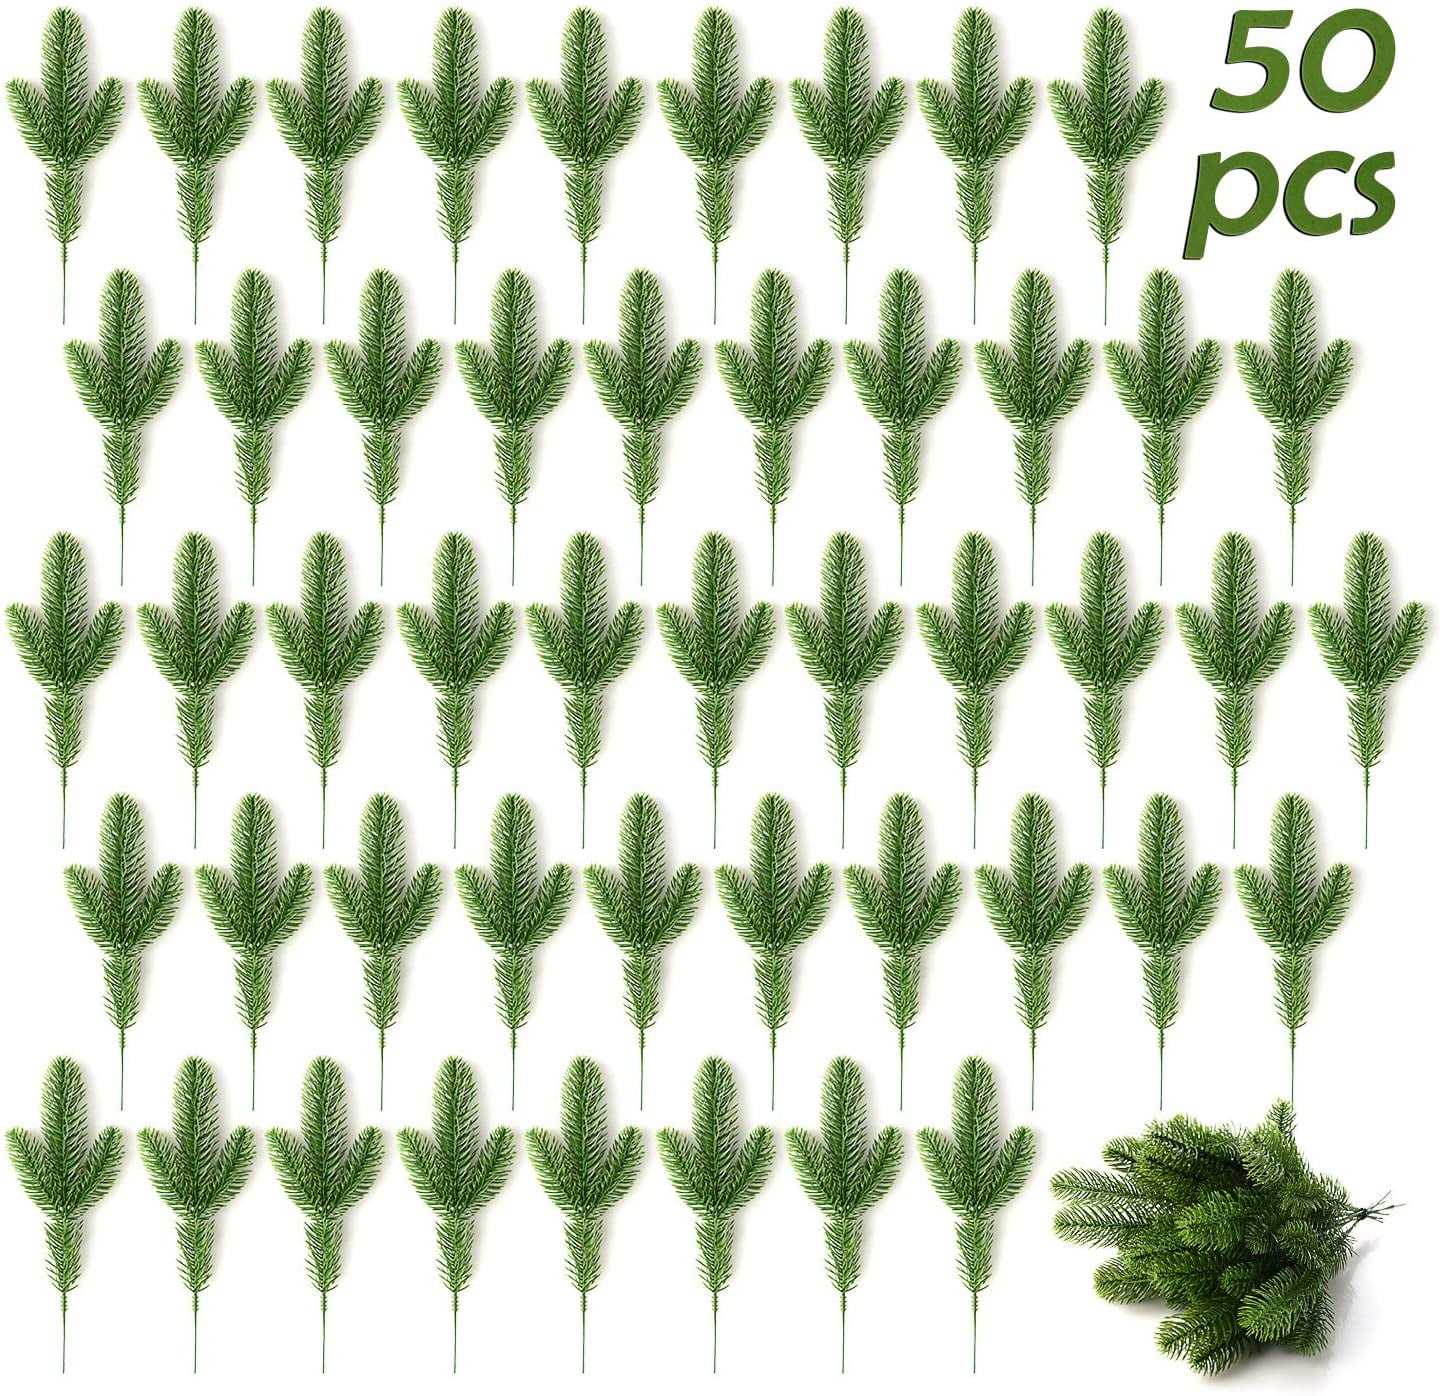 100 Pcs Artificial Pine Branches Green Plants Pine Needles DIY Accessories  for Garland Wreath Christmas and Home Garden Decor (50, Green) 